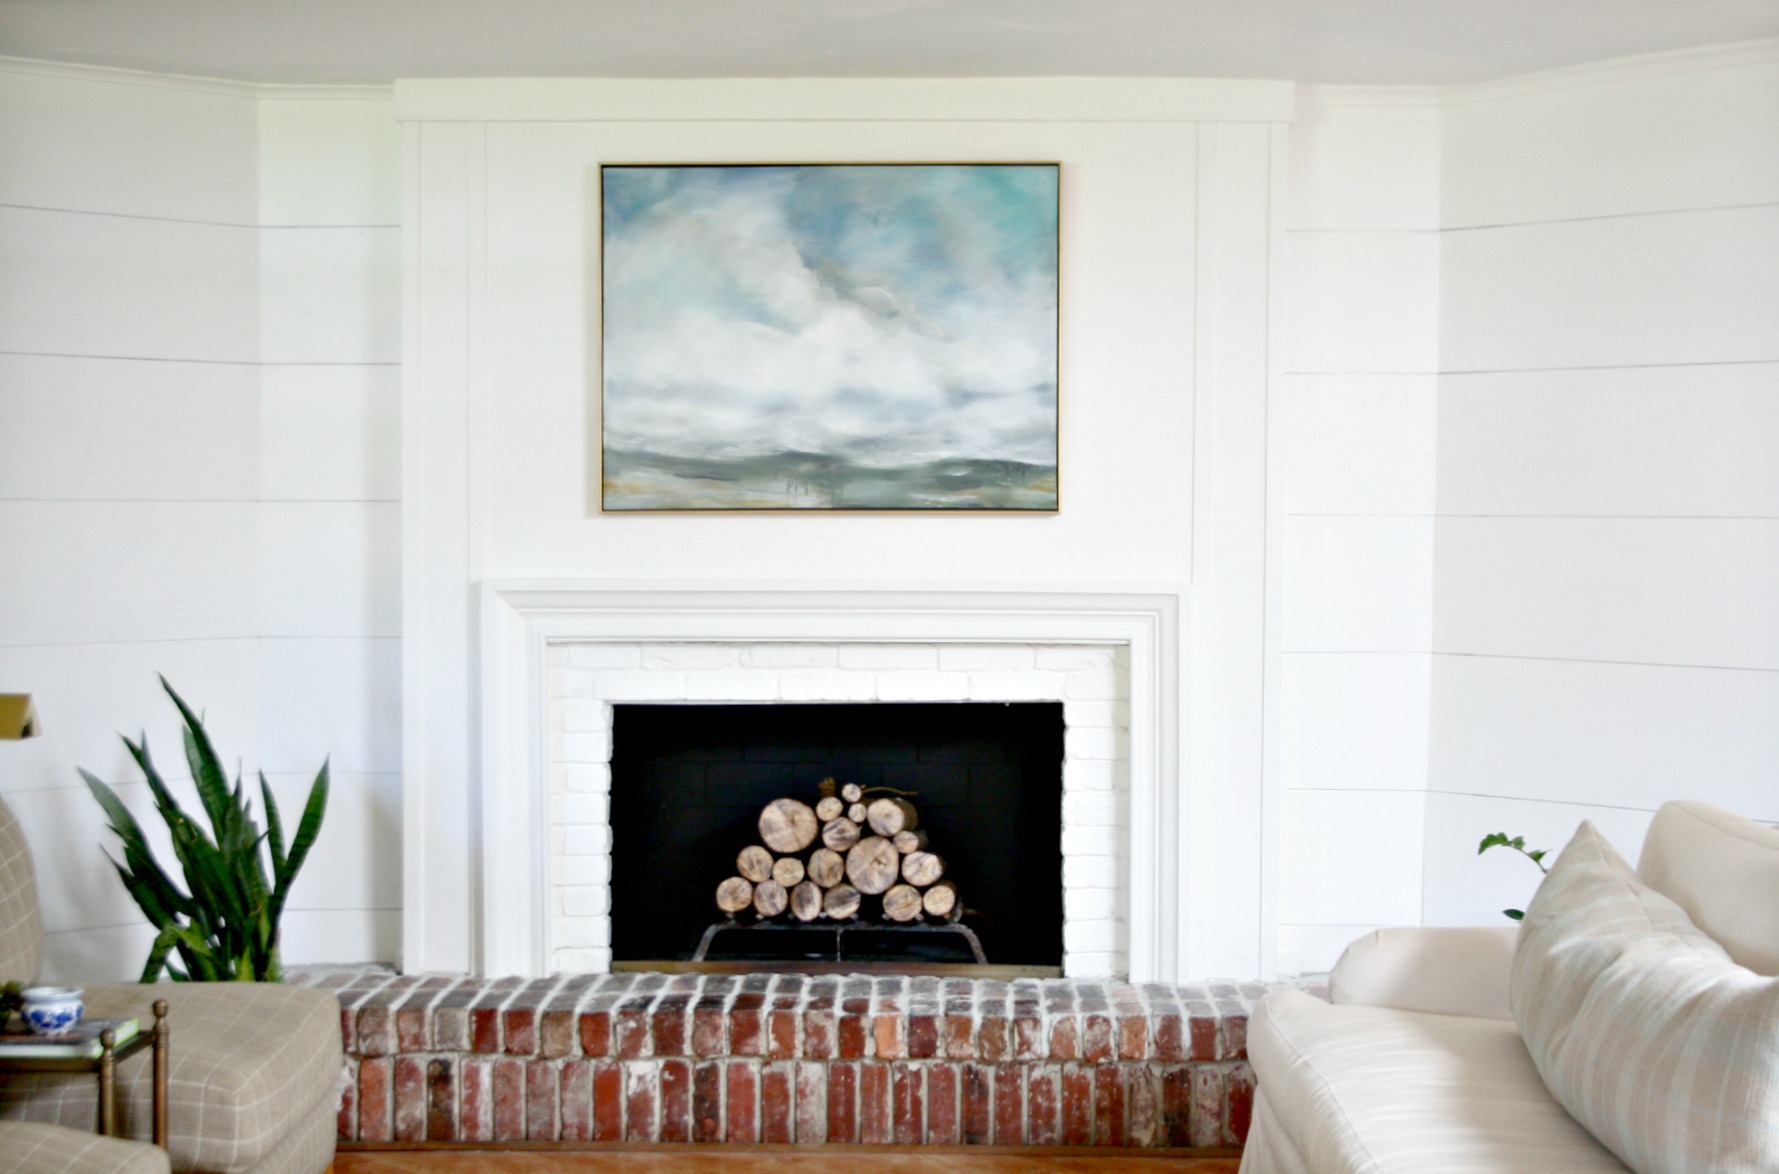 How To Resurface Fireplace